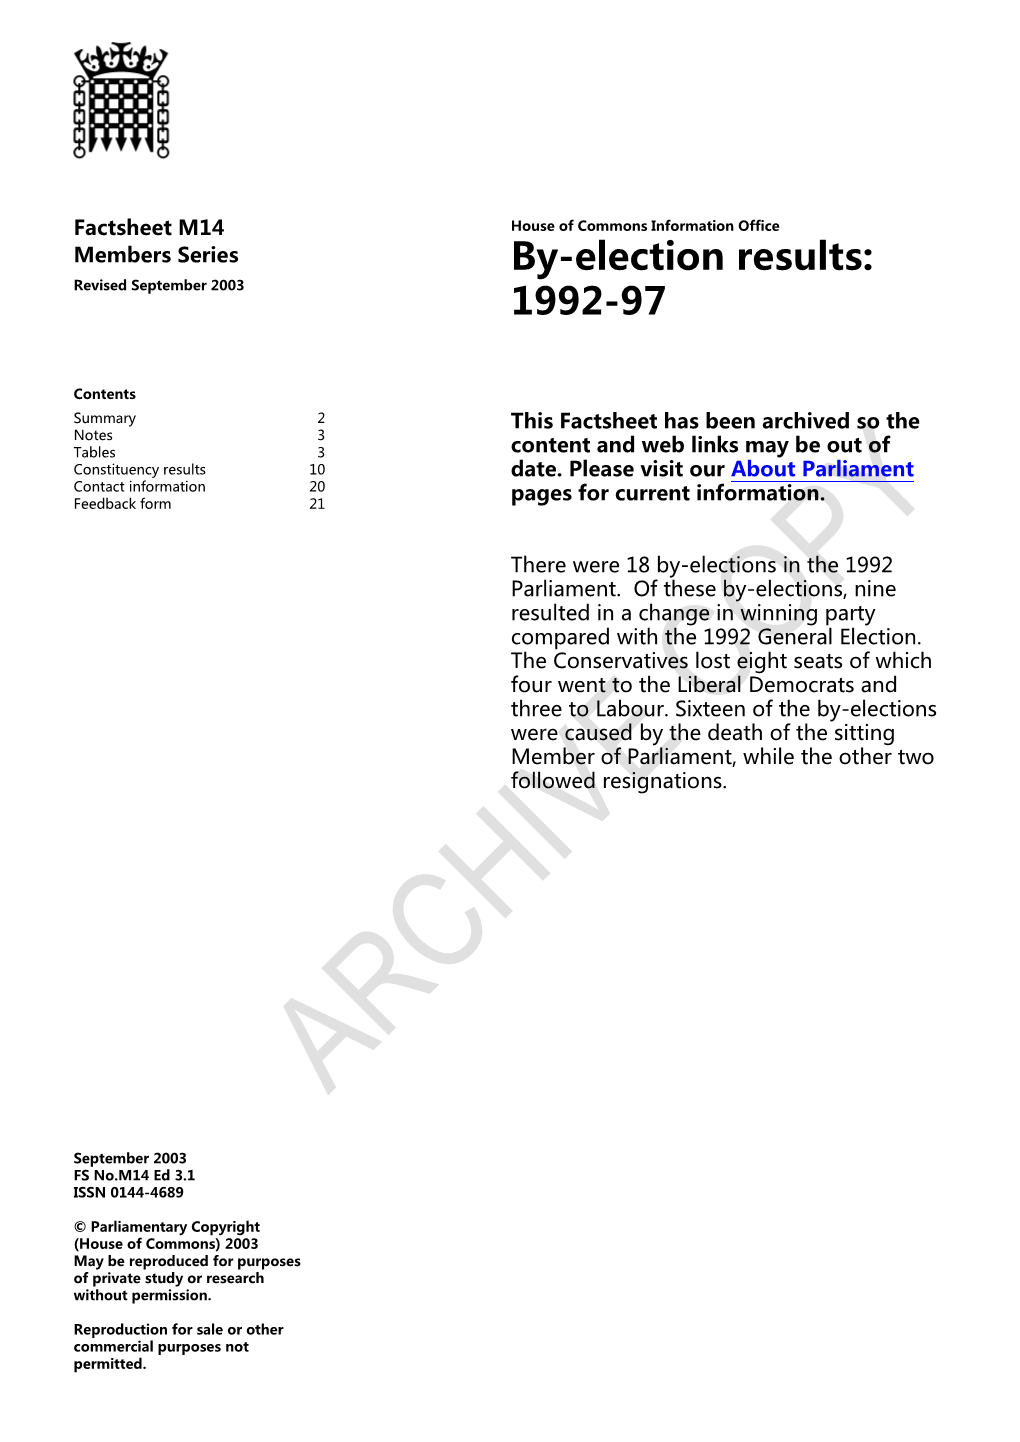 By-Election Results: Revised September 2003 1992-97